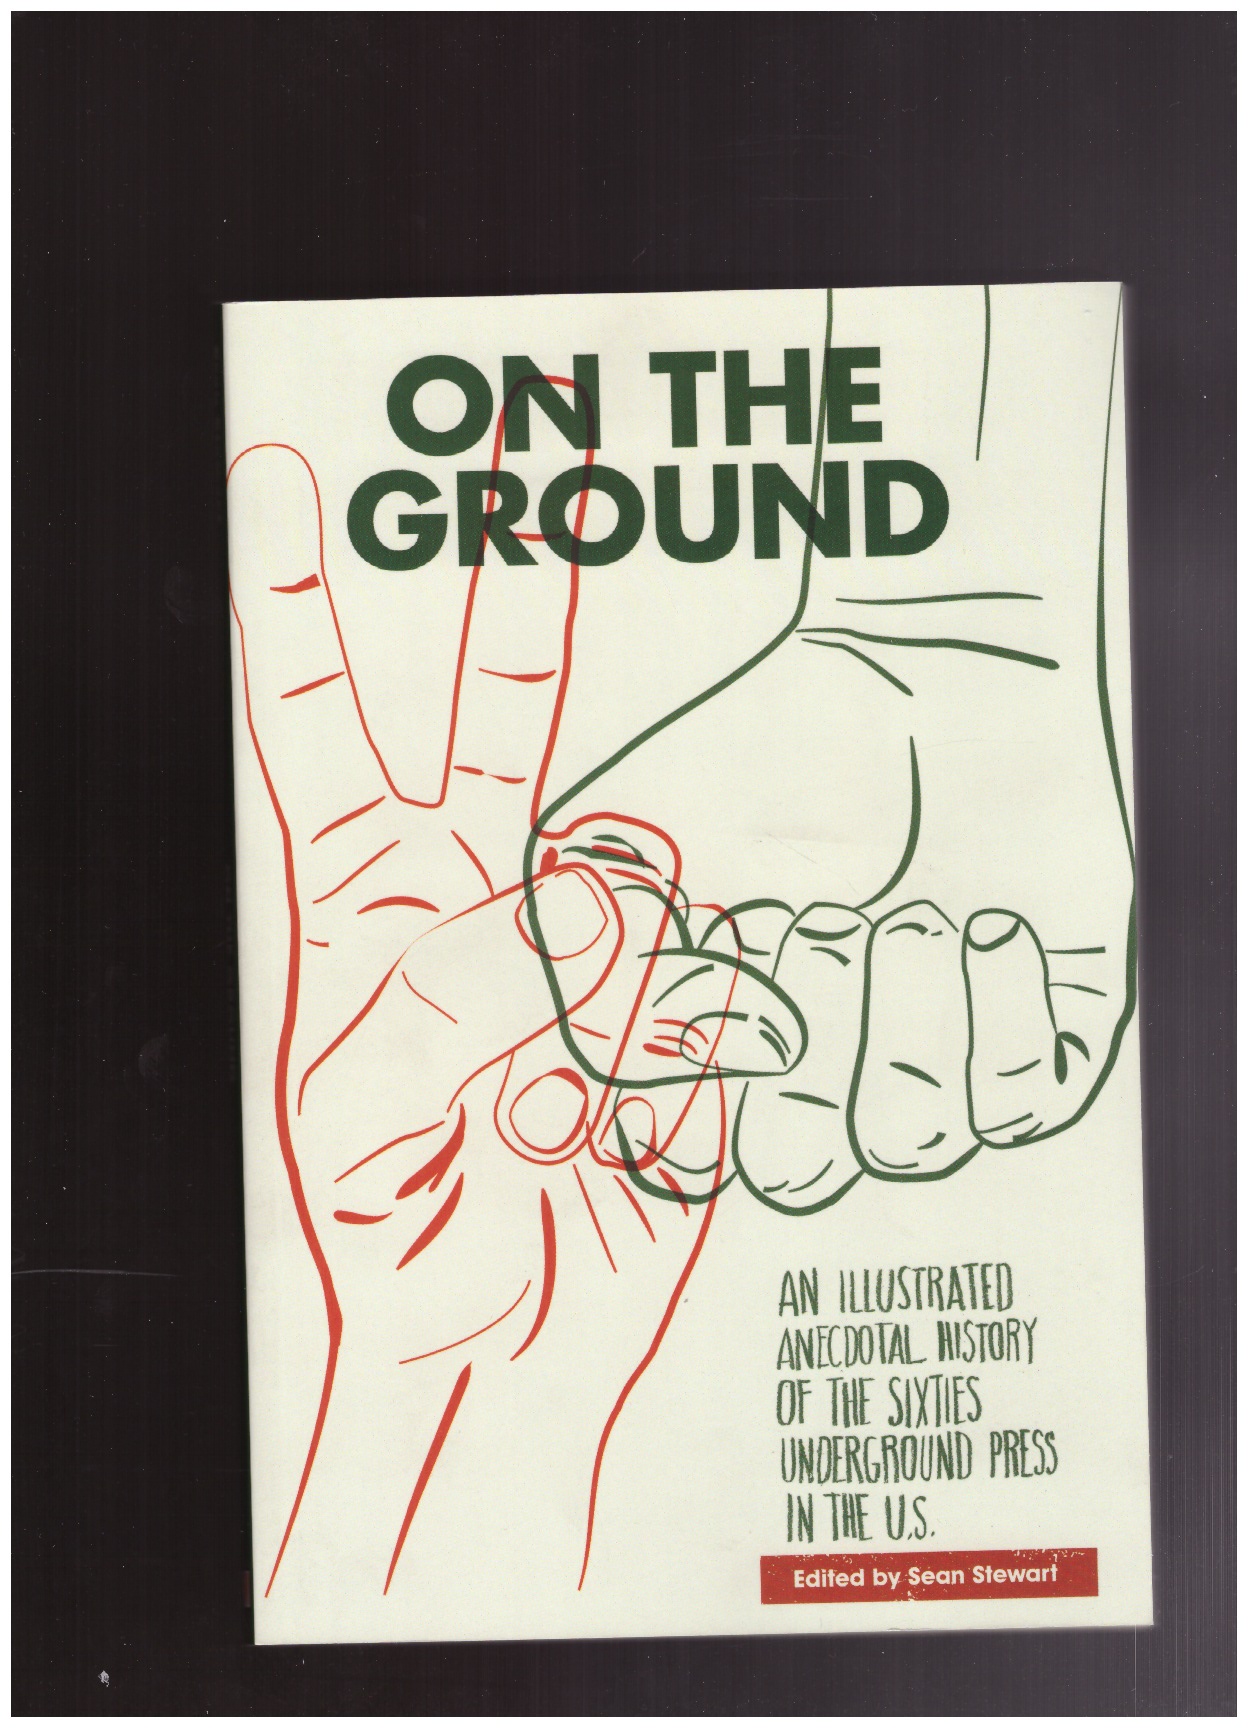 STEWART, Sean (ed.) - On the Ground: An Illustrated Anecdotal History of the Sixties Underground Press in the U.S.